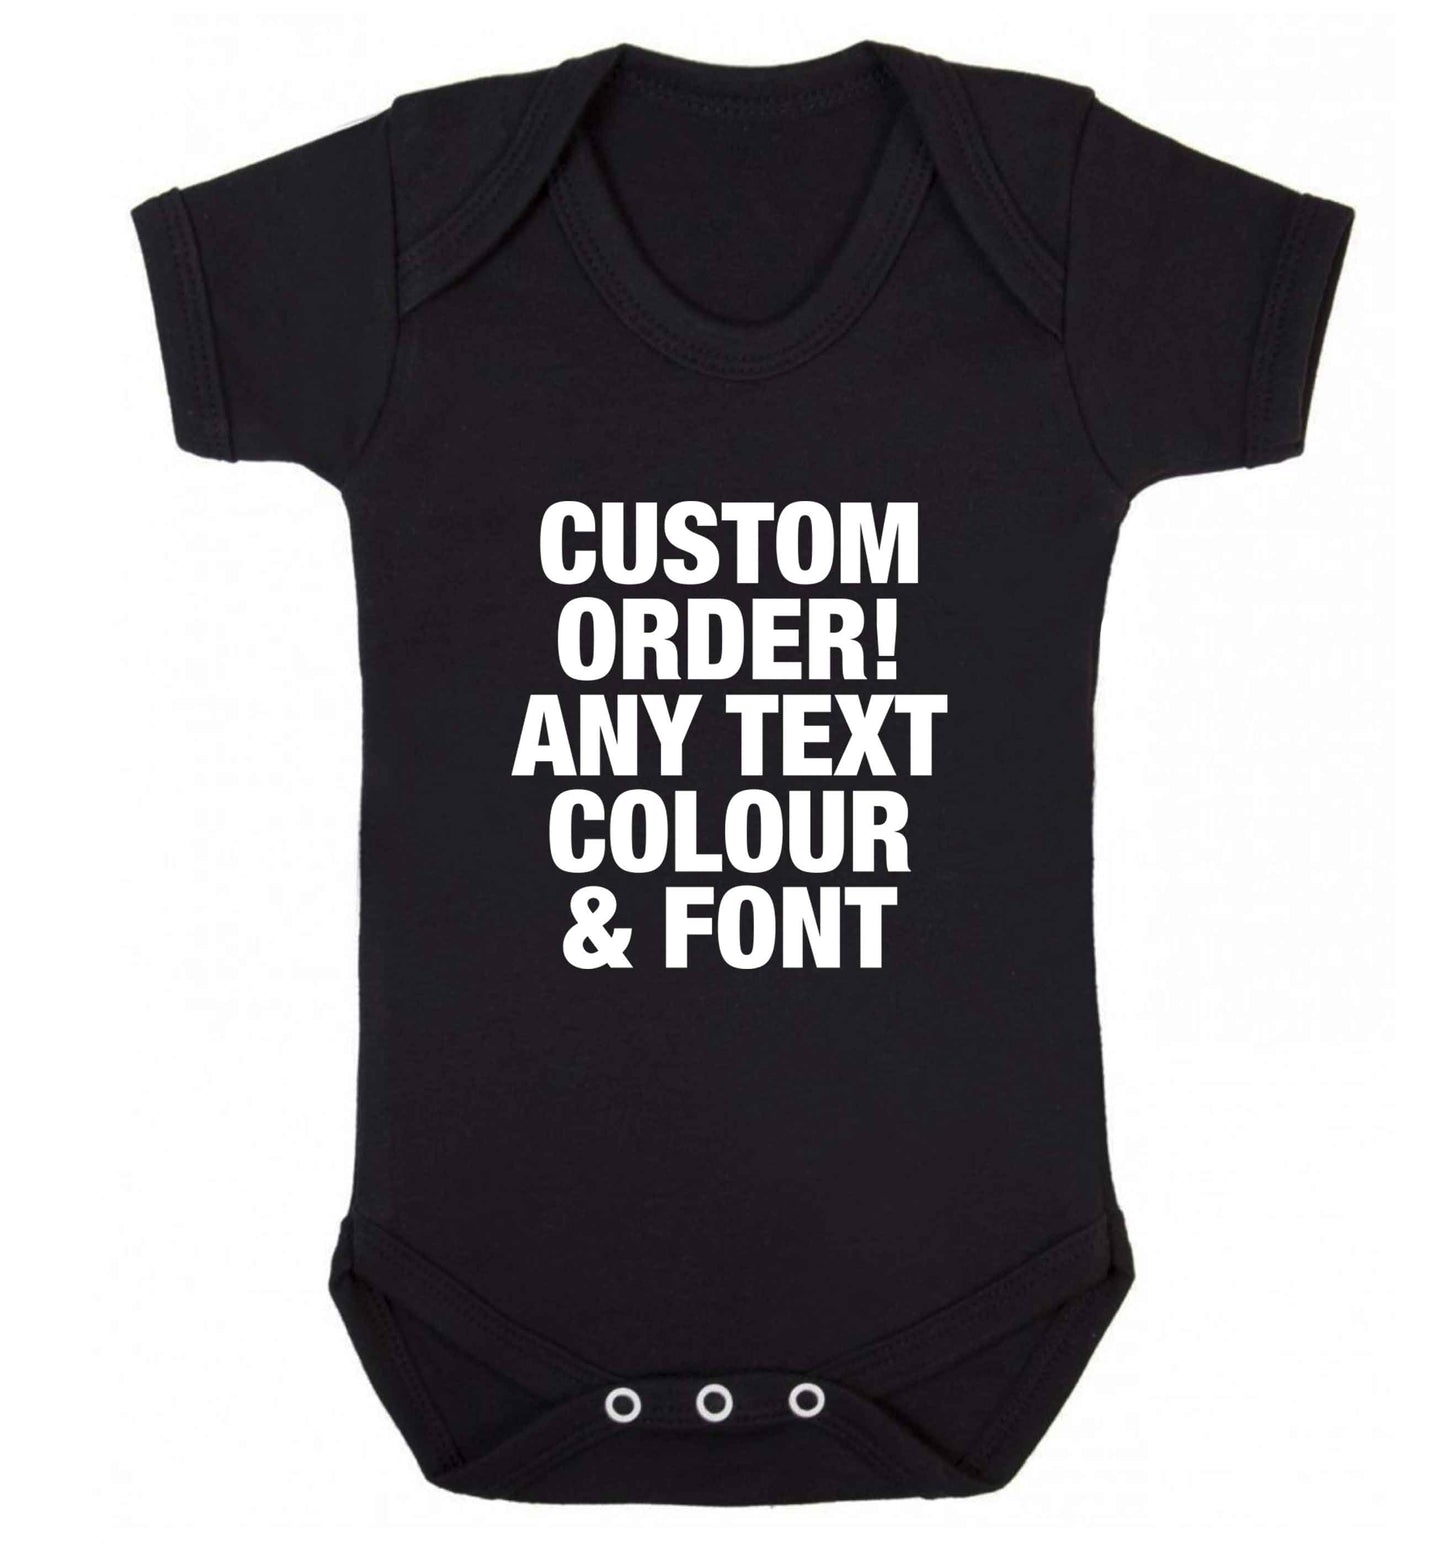 Custom order any text colour and font baby vest black 18-24 months